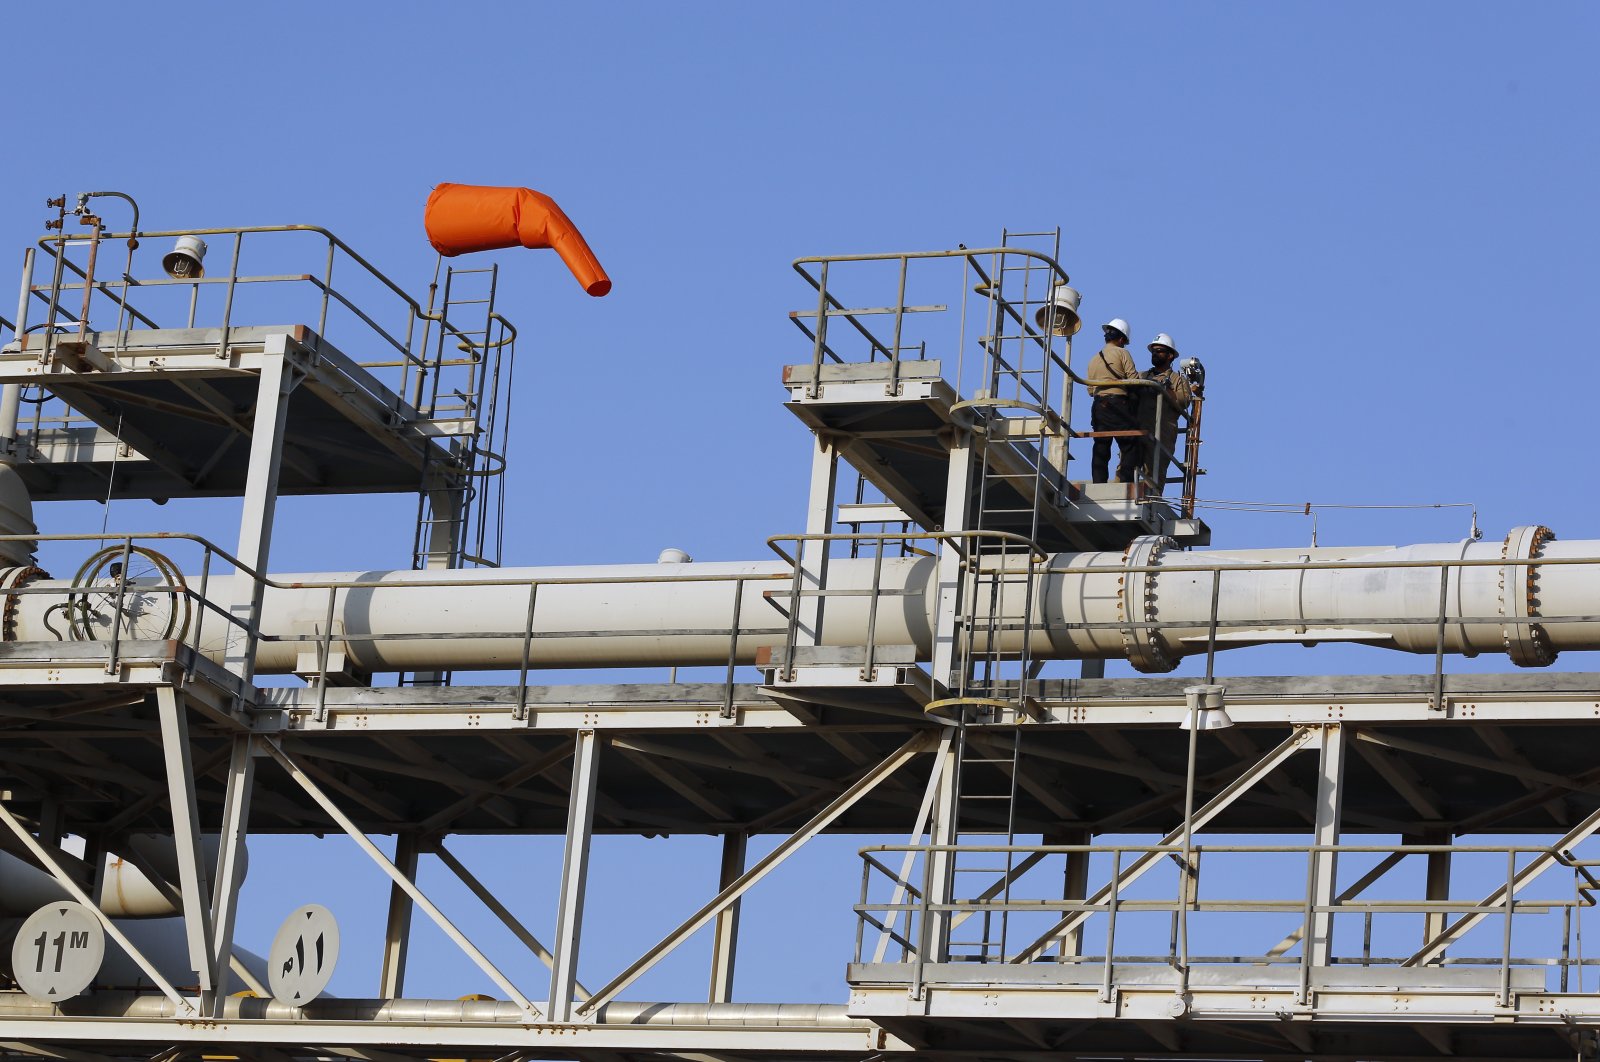 Workers stand on a platform at a Saudi Aramco oil separator processing facility in Abqaiq, near Dammam in the kingdom's Eastern Province, Sept. 20, 2019. (AP Photo)